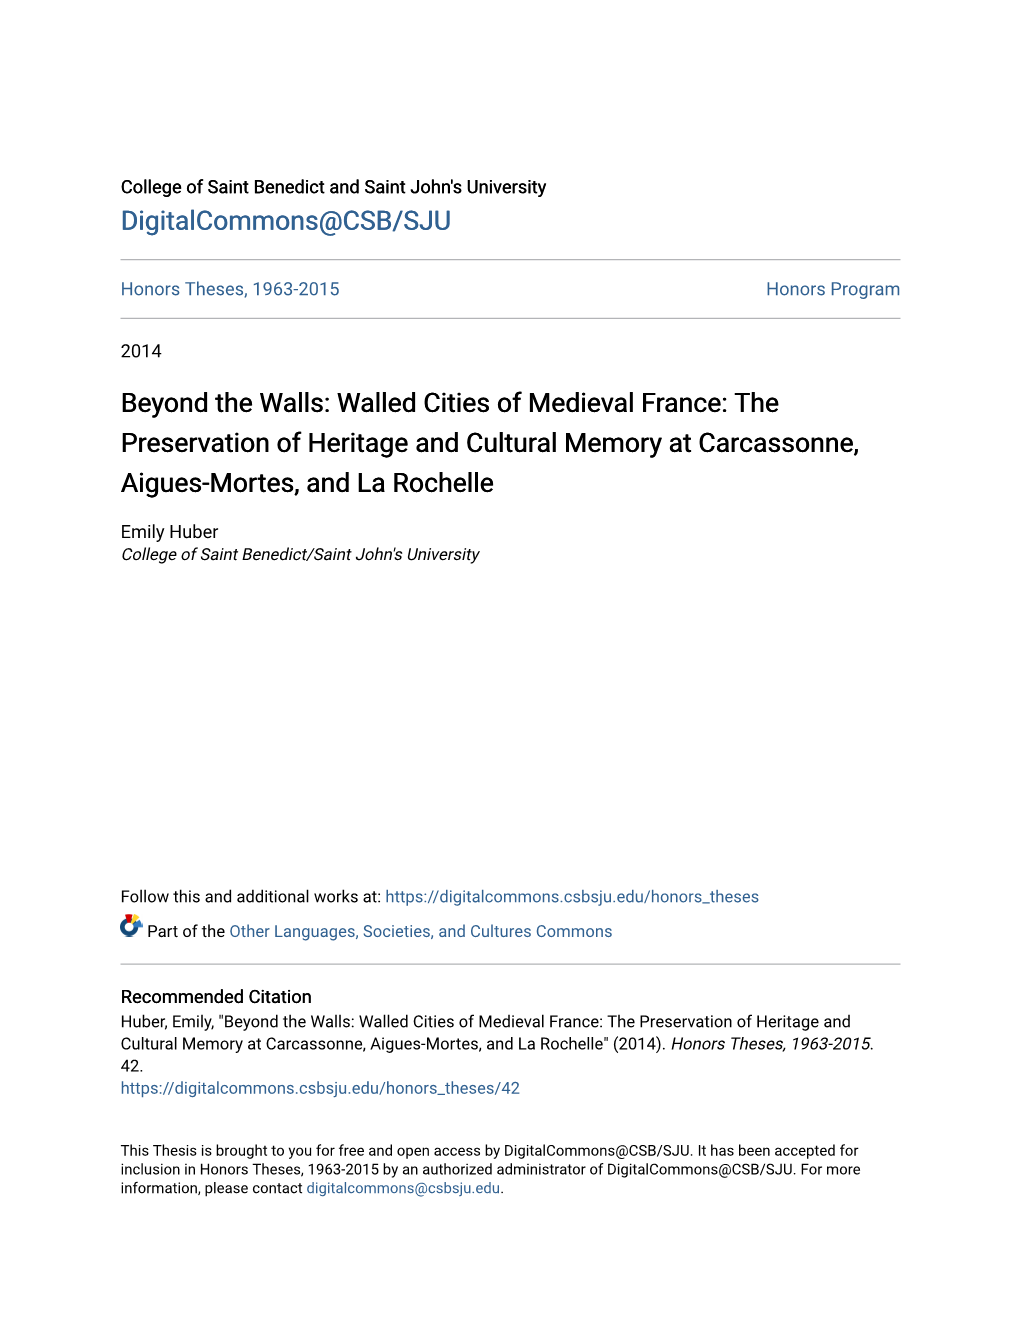 Walled Cities of Medieval France: the Preservation of Heritage and Cultural Memory at Carcassonne, Aigues-Mortes, and La Rochelle